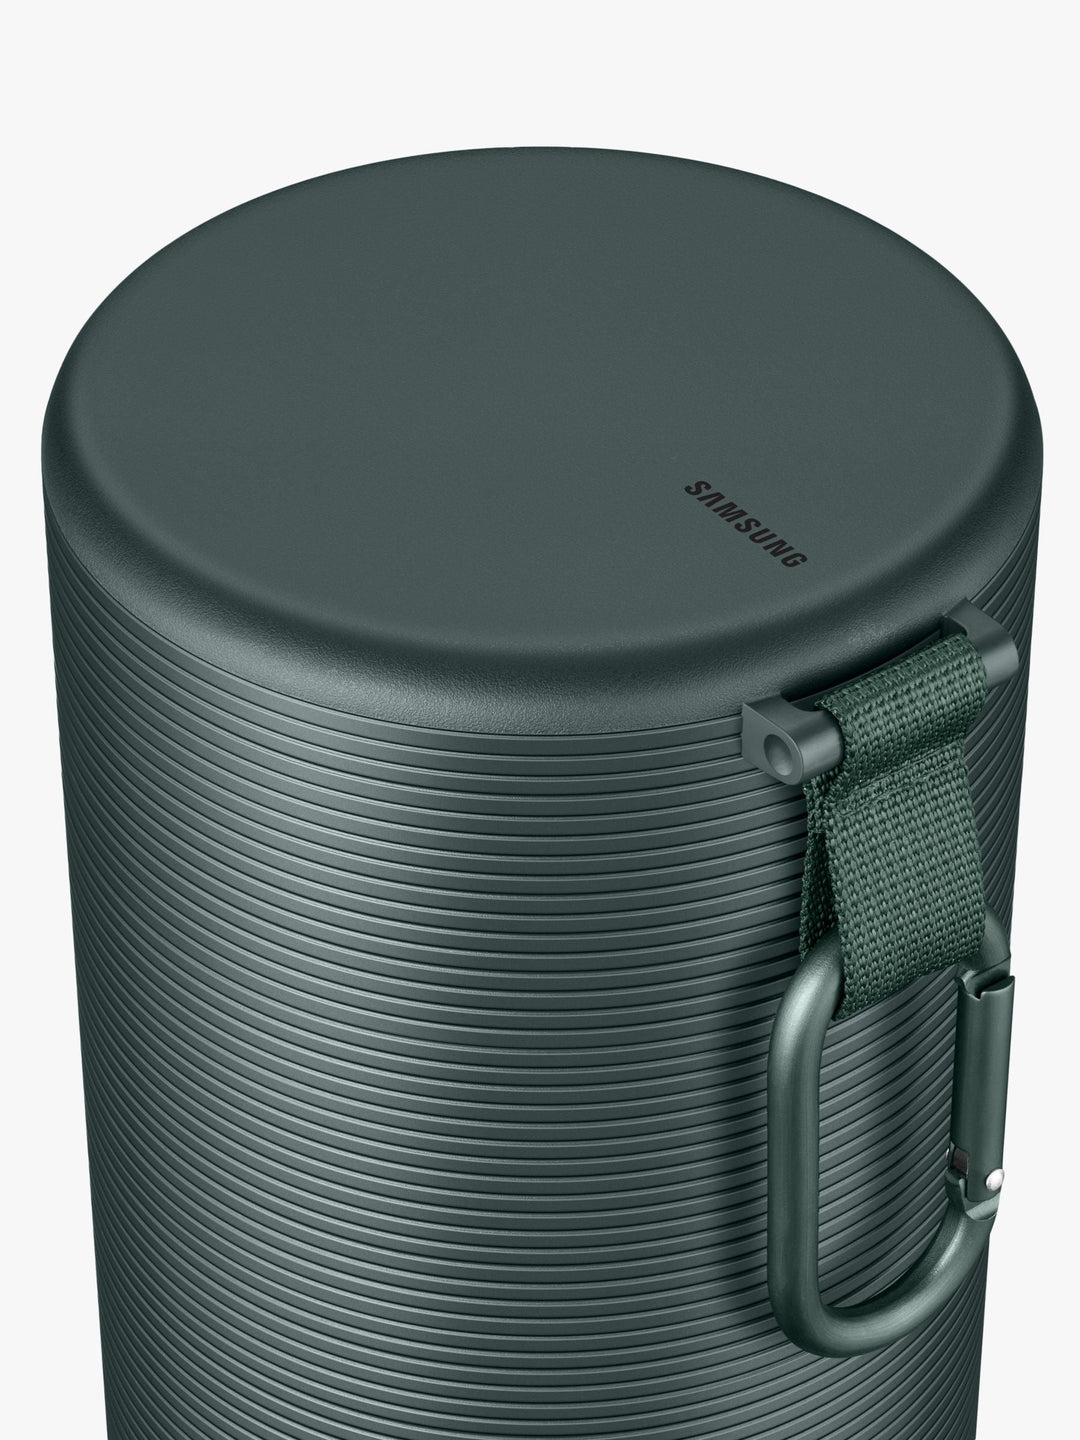 Samsung Freestyle Projector Case, Dark Green, Durable, Weather-Resistant, Compact, IP55 Water/Dust Protection